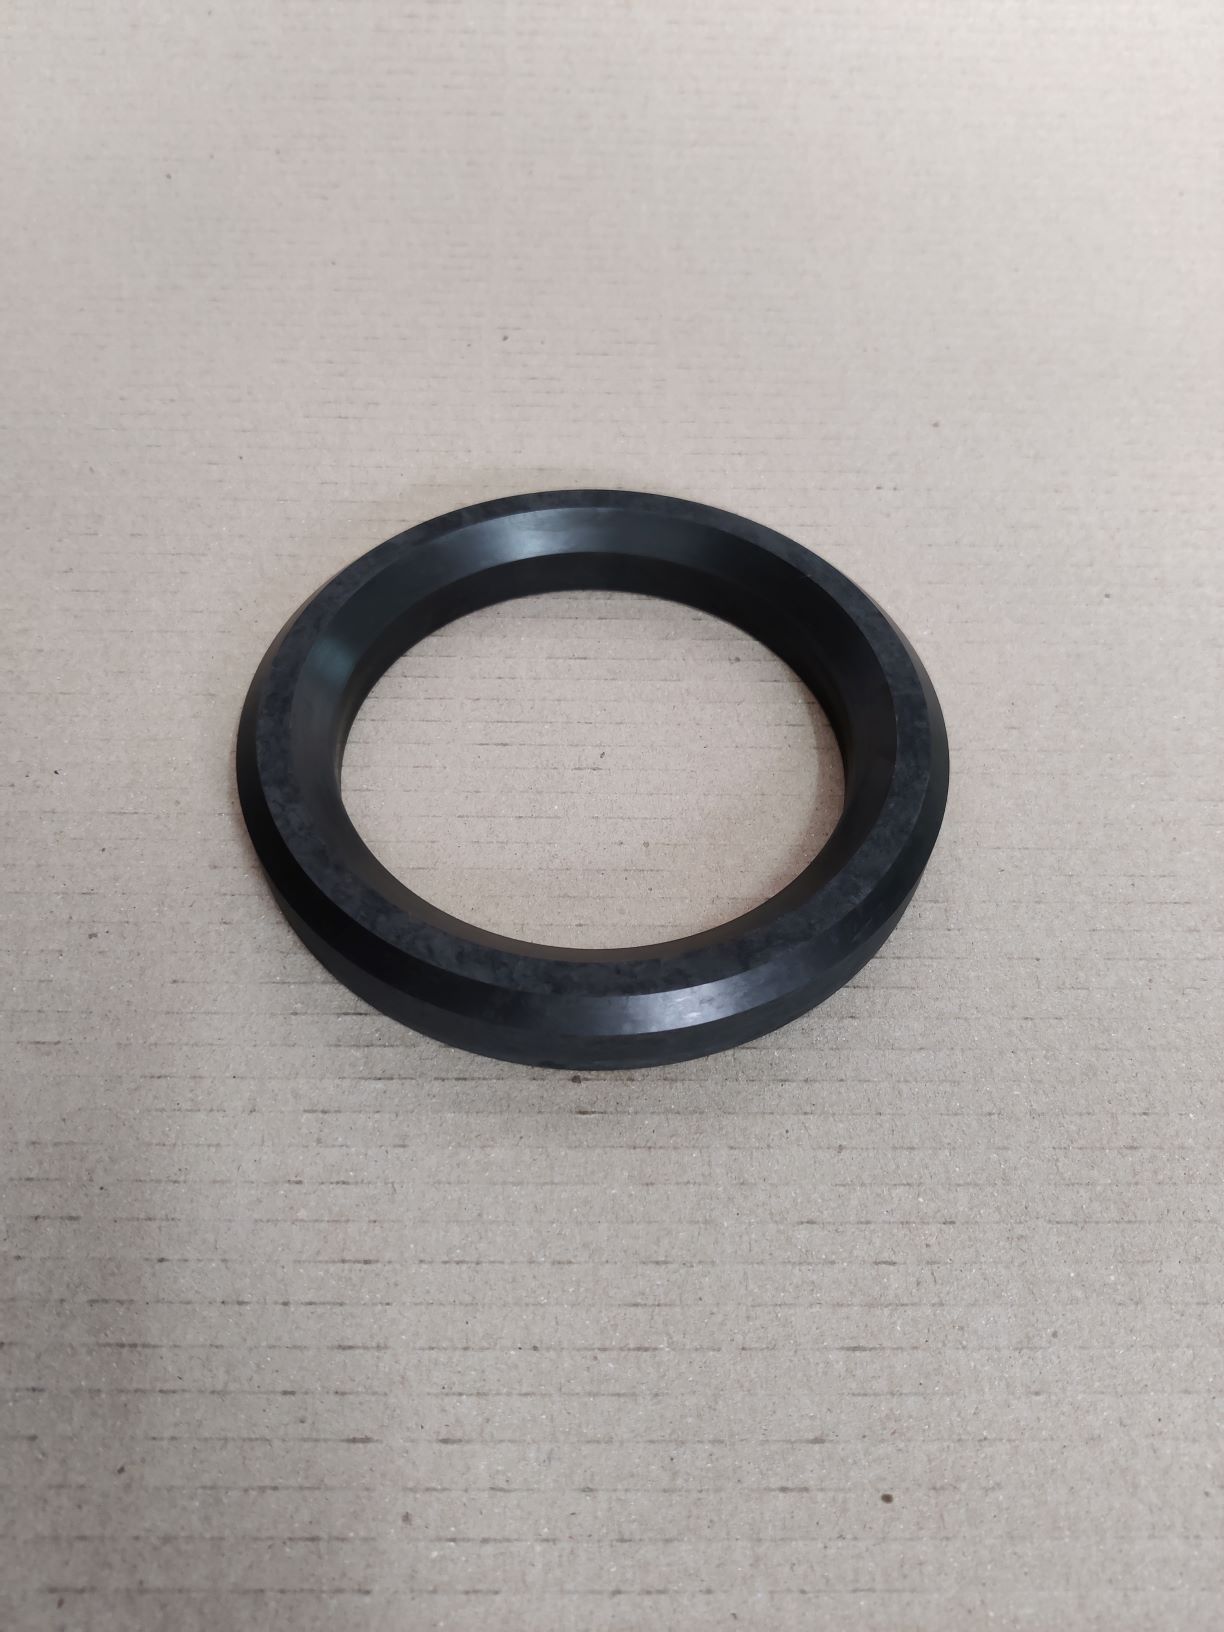 SEW FRICTION RING D/DF41-42 PART NO 150679X CARBON